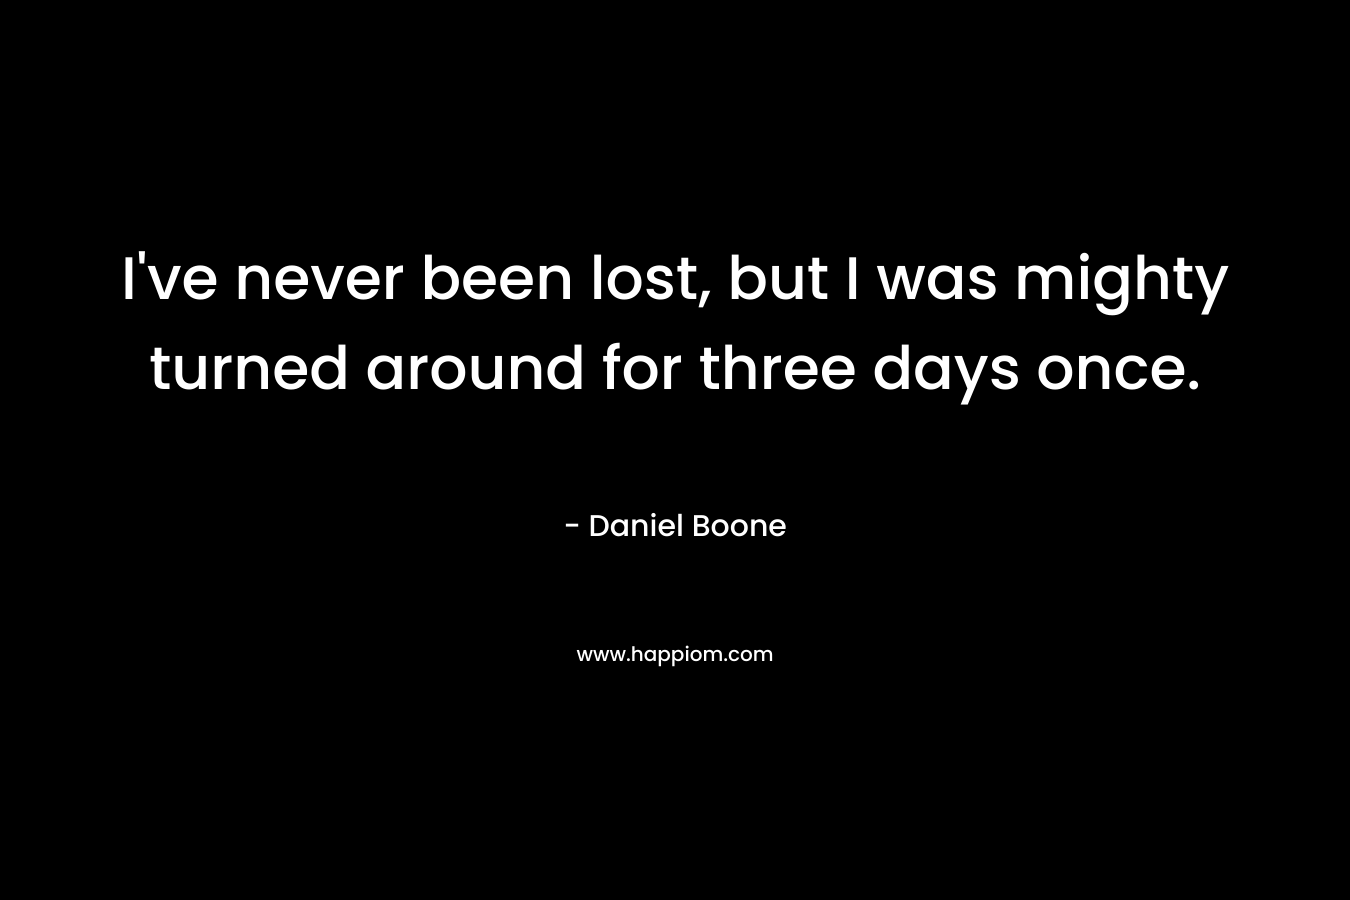 I’ve never been lost, but I was mighty turned around for three days once. – Daniel Boone